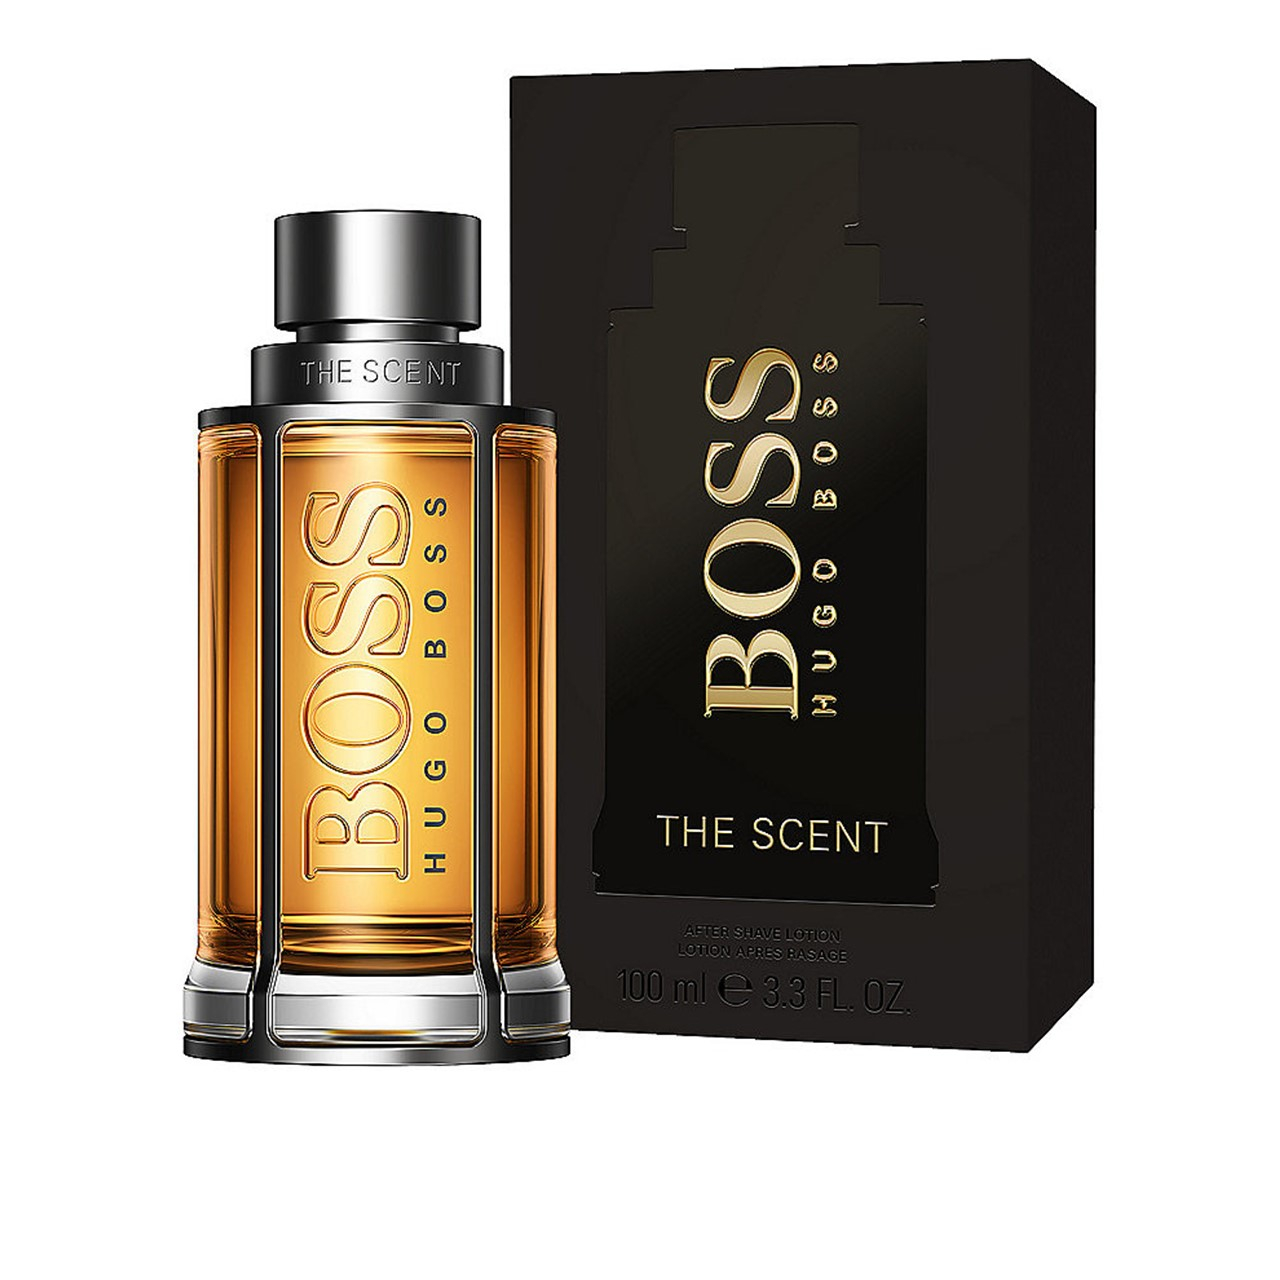 Hugo Boss Boss The Scent After Shave Lotion 100ml (3.38fl oz)